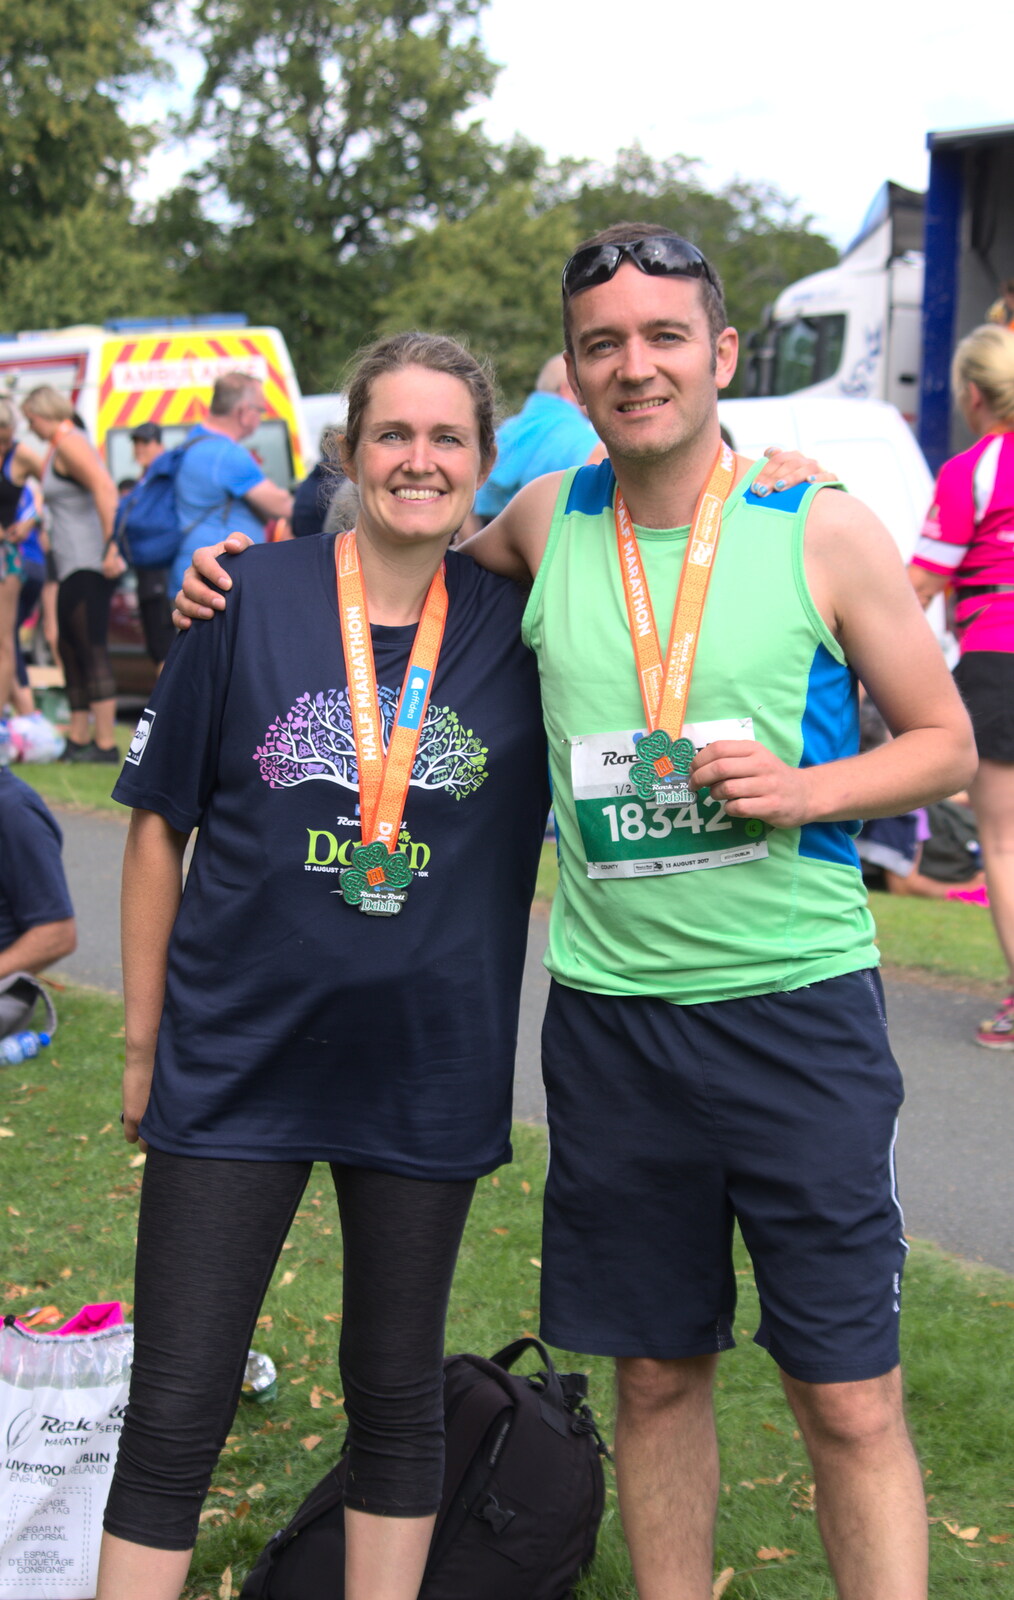 Isobel and James show off their medals from Isobel's Rock'n'Roll Half Marathon, Dublin, Ireland - 13th August 2017